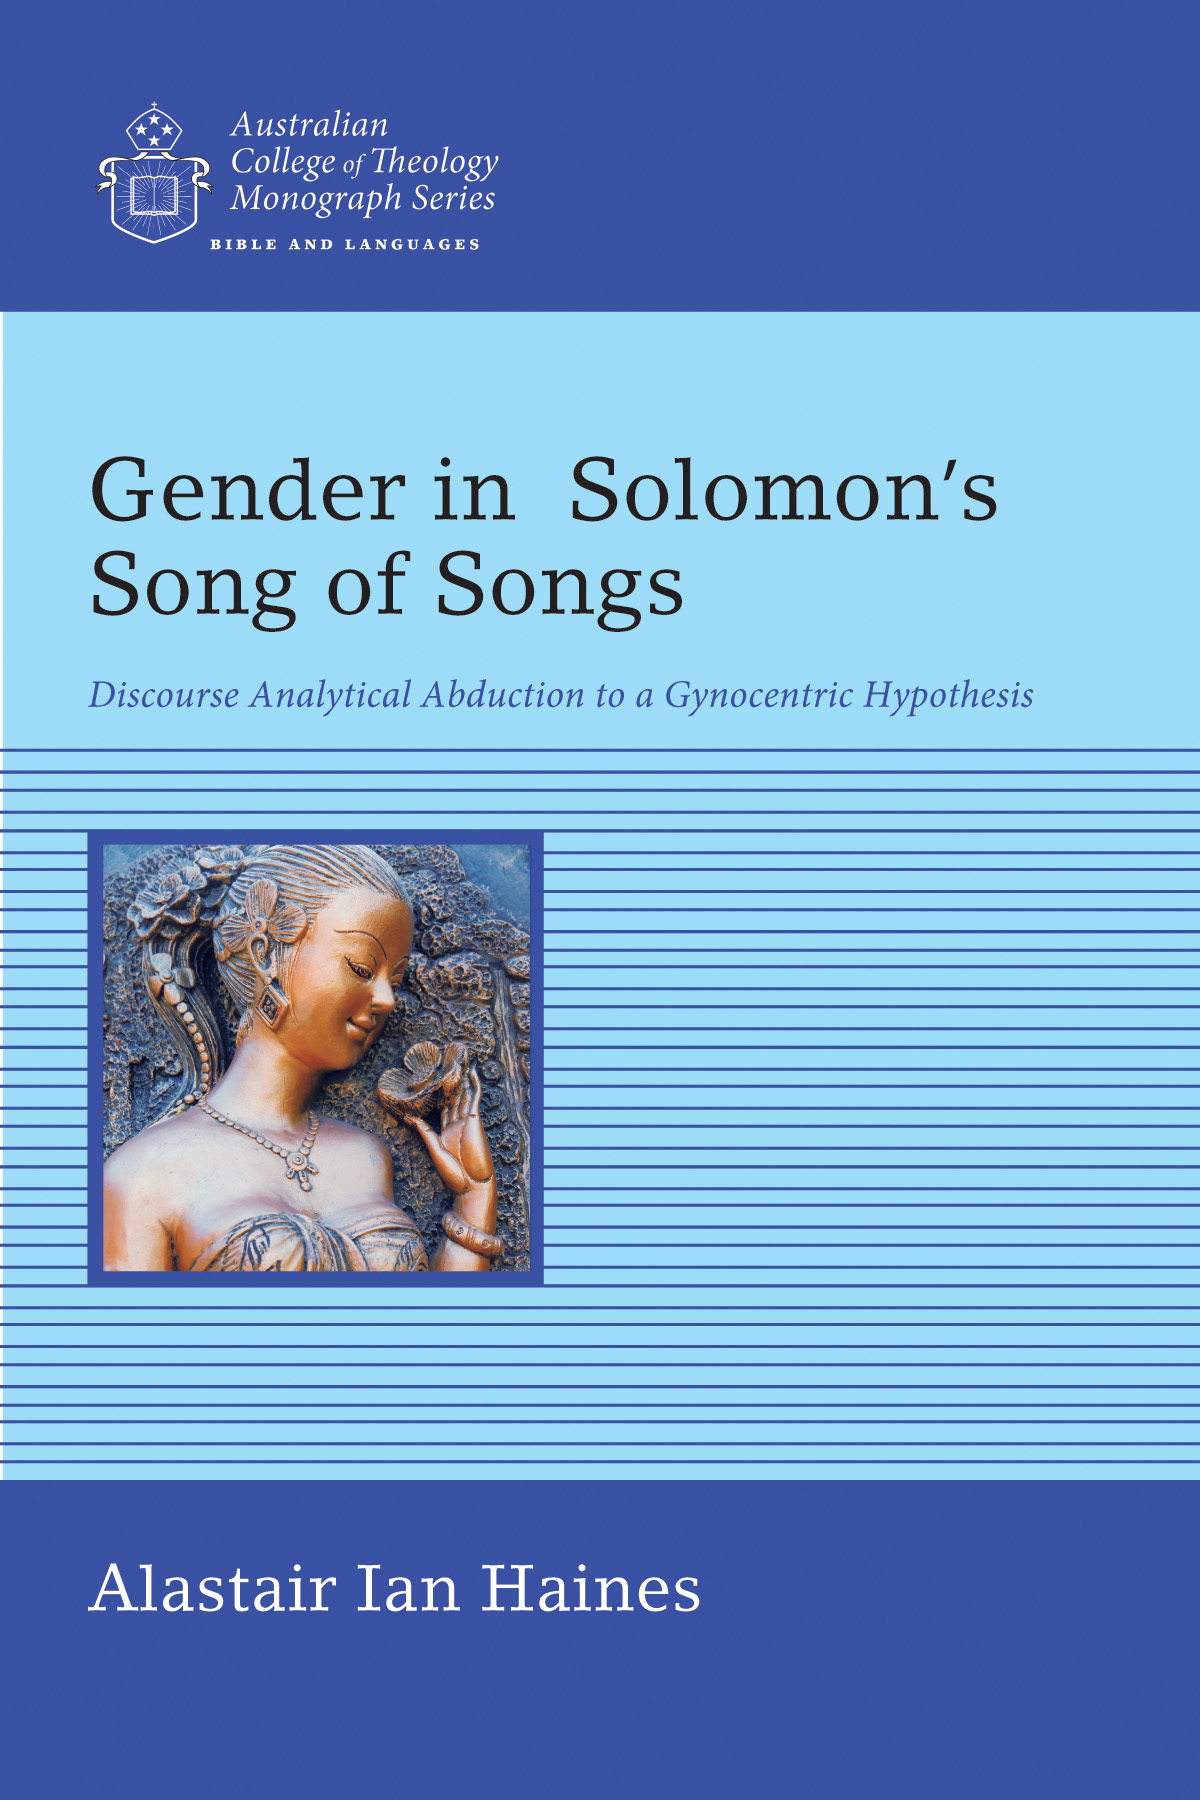 Gender in Solomonʼs Song of Songs: Discourse Analytical Abduction to a Gynocentric Hypothesis